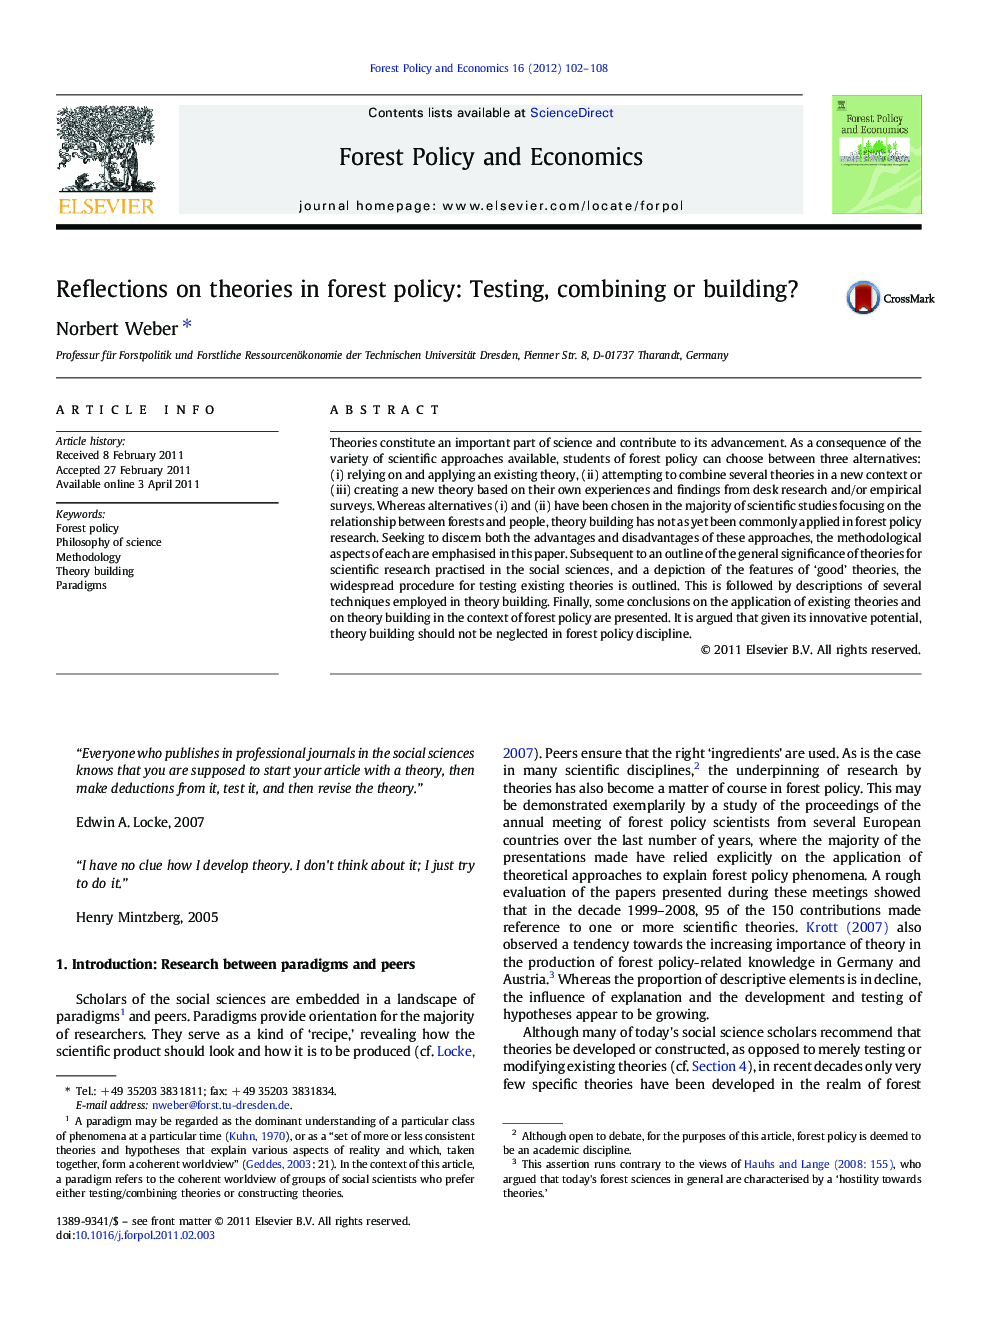 Reflections on theories in forest policy: Testing, combining or building?